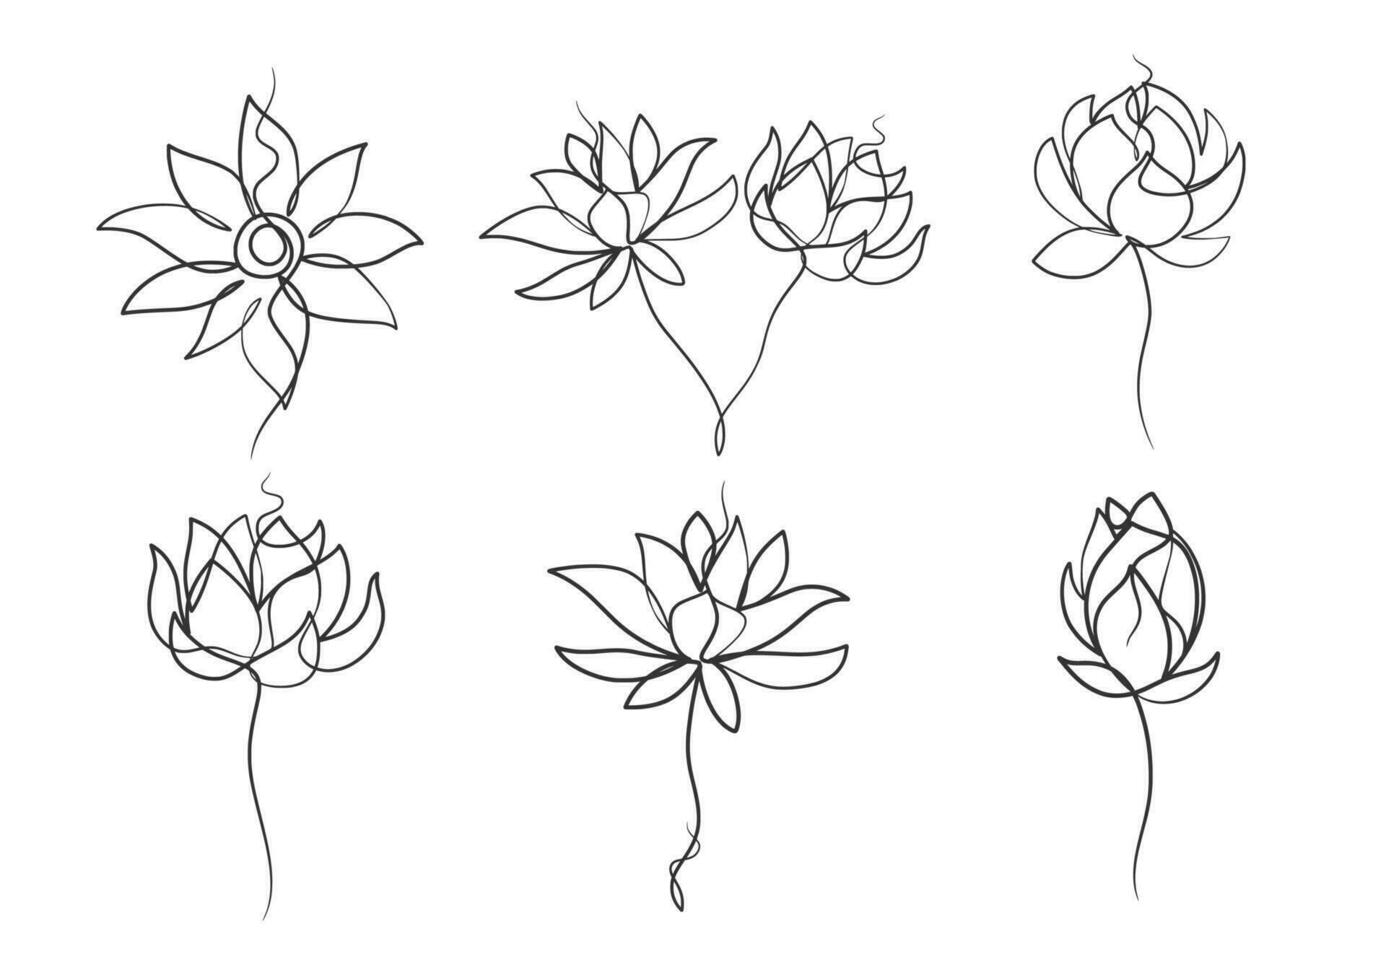 Continuous one line art drawing of beauty lotus flower vector